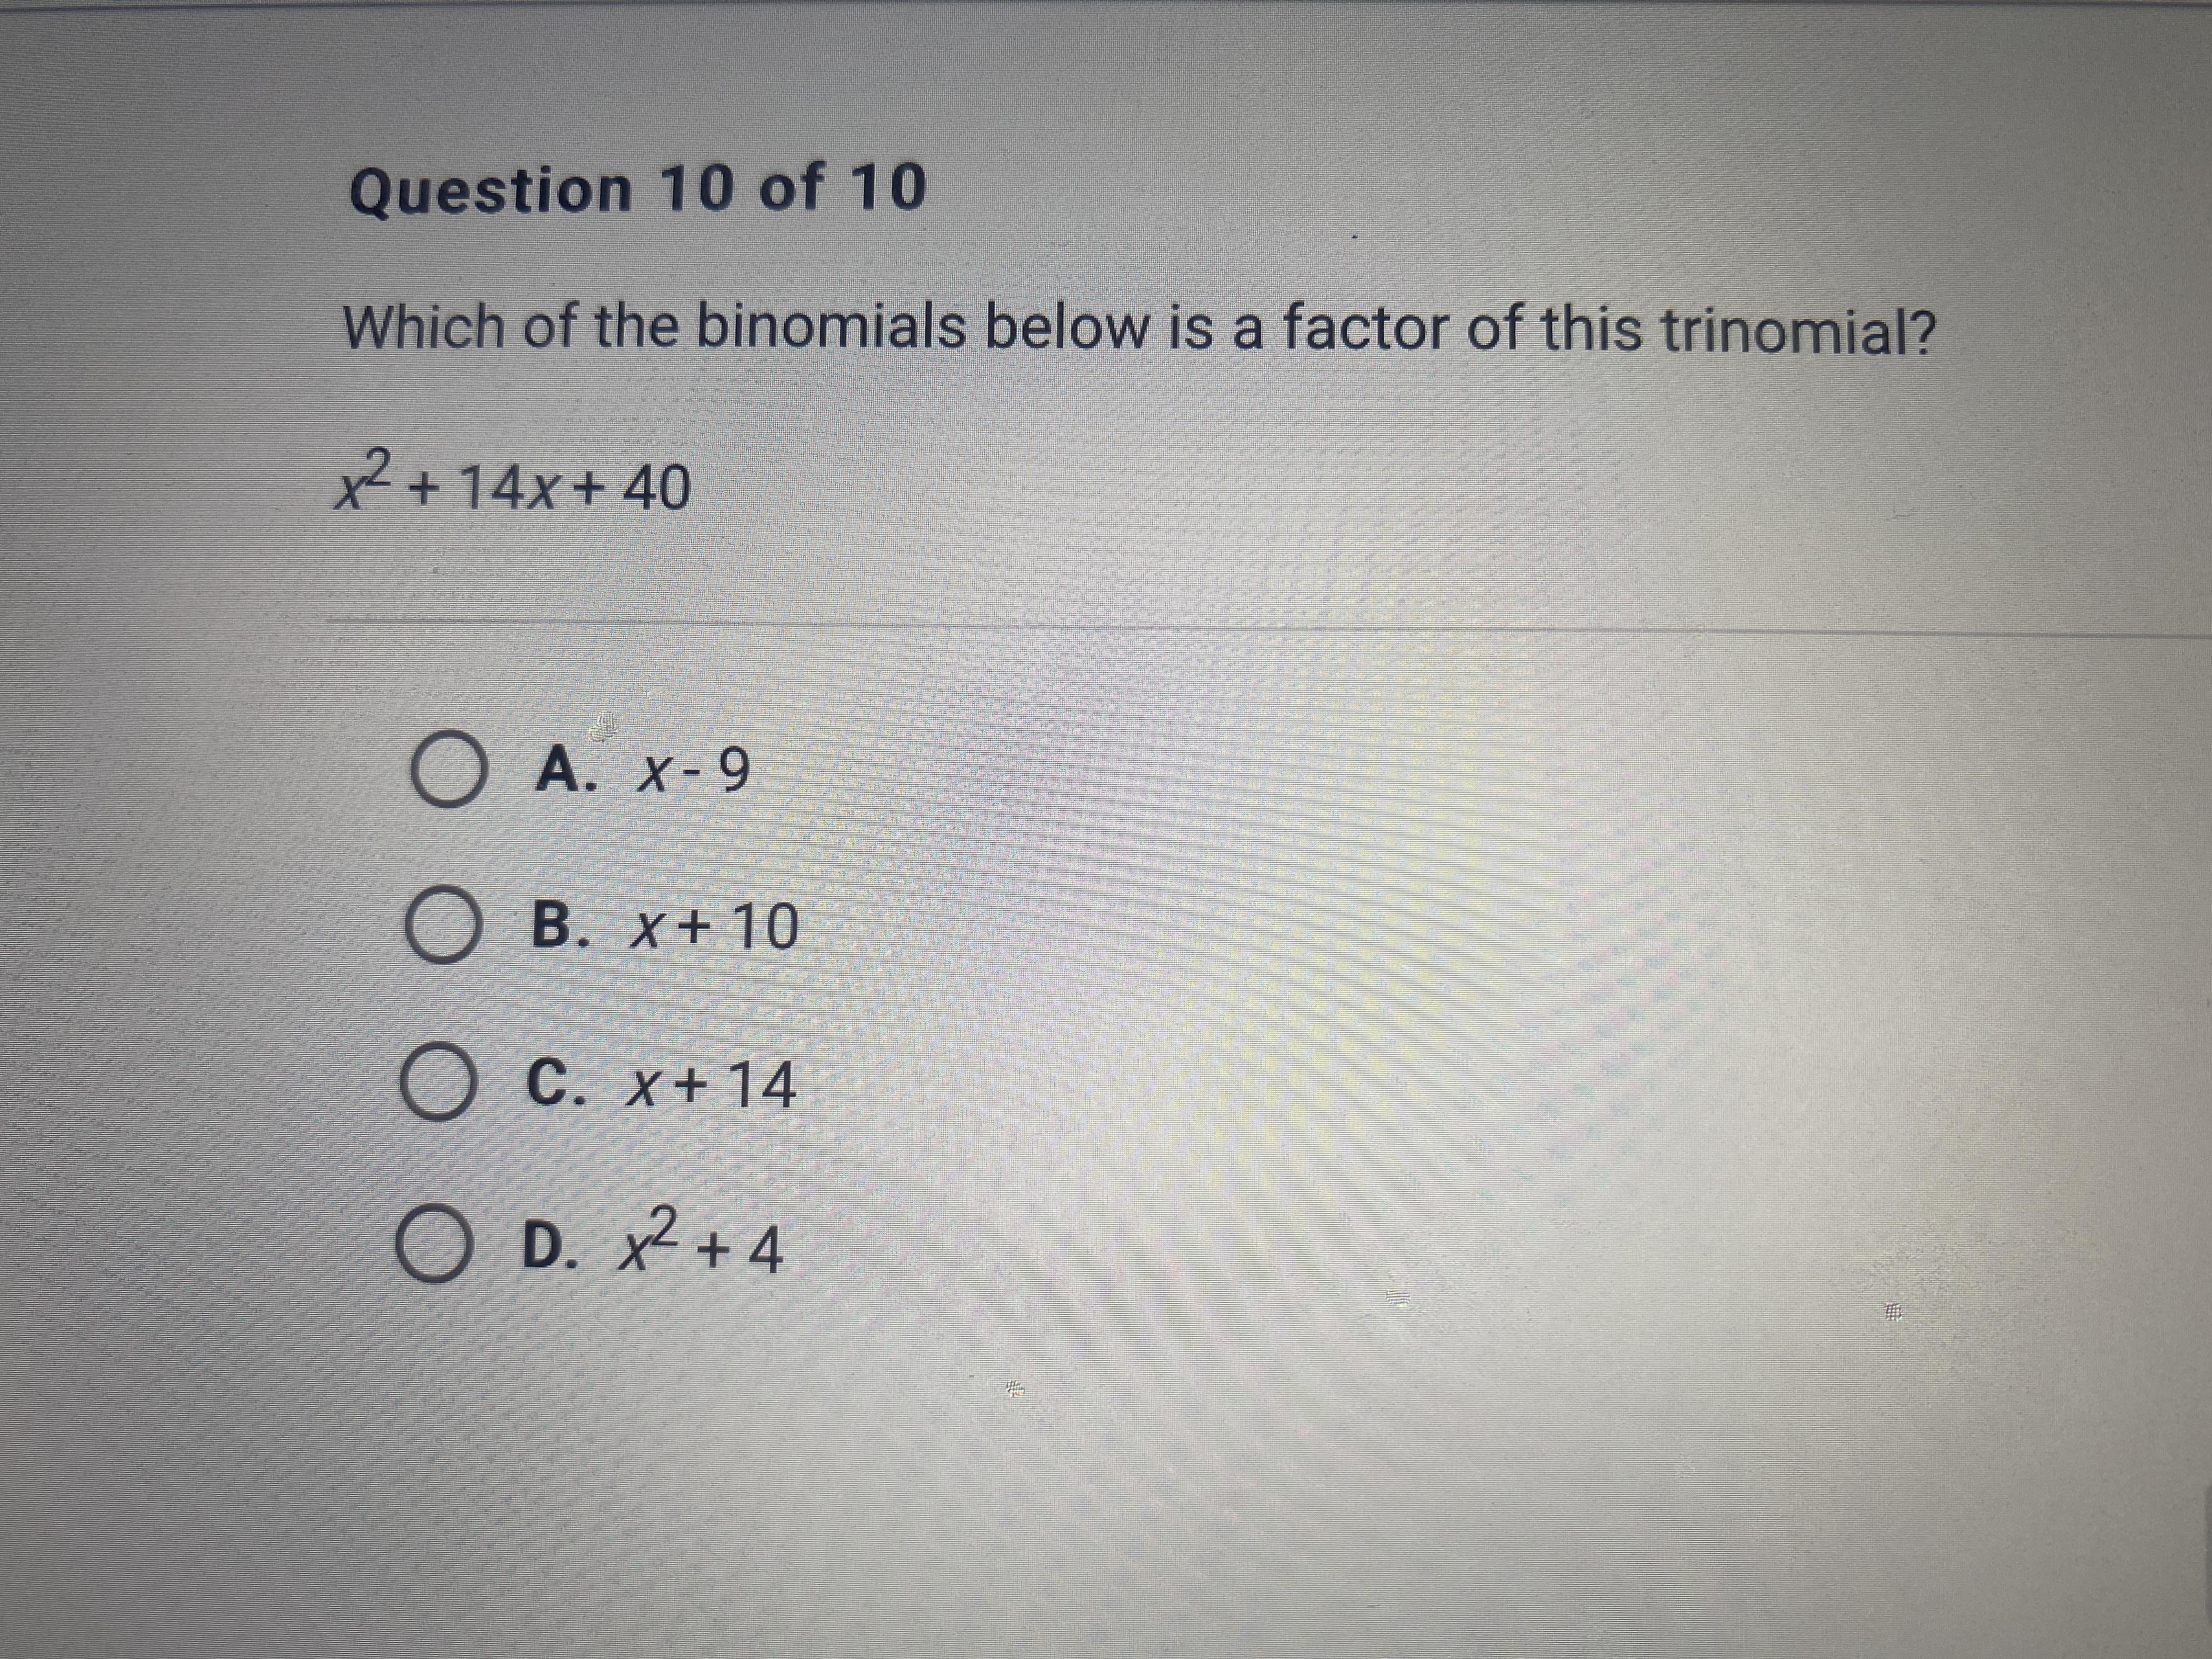 Which Of The Binomials Below Is A Factor Of This Trinomial? X^2+14x+40A. X-9B. X+10C. X+14D. X^2 + 40